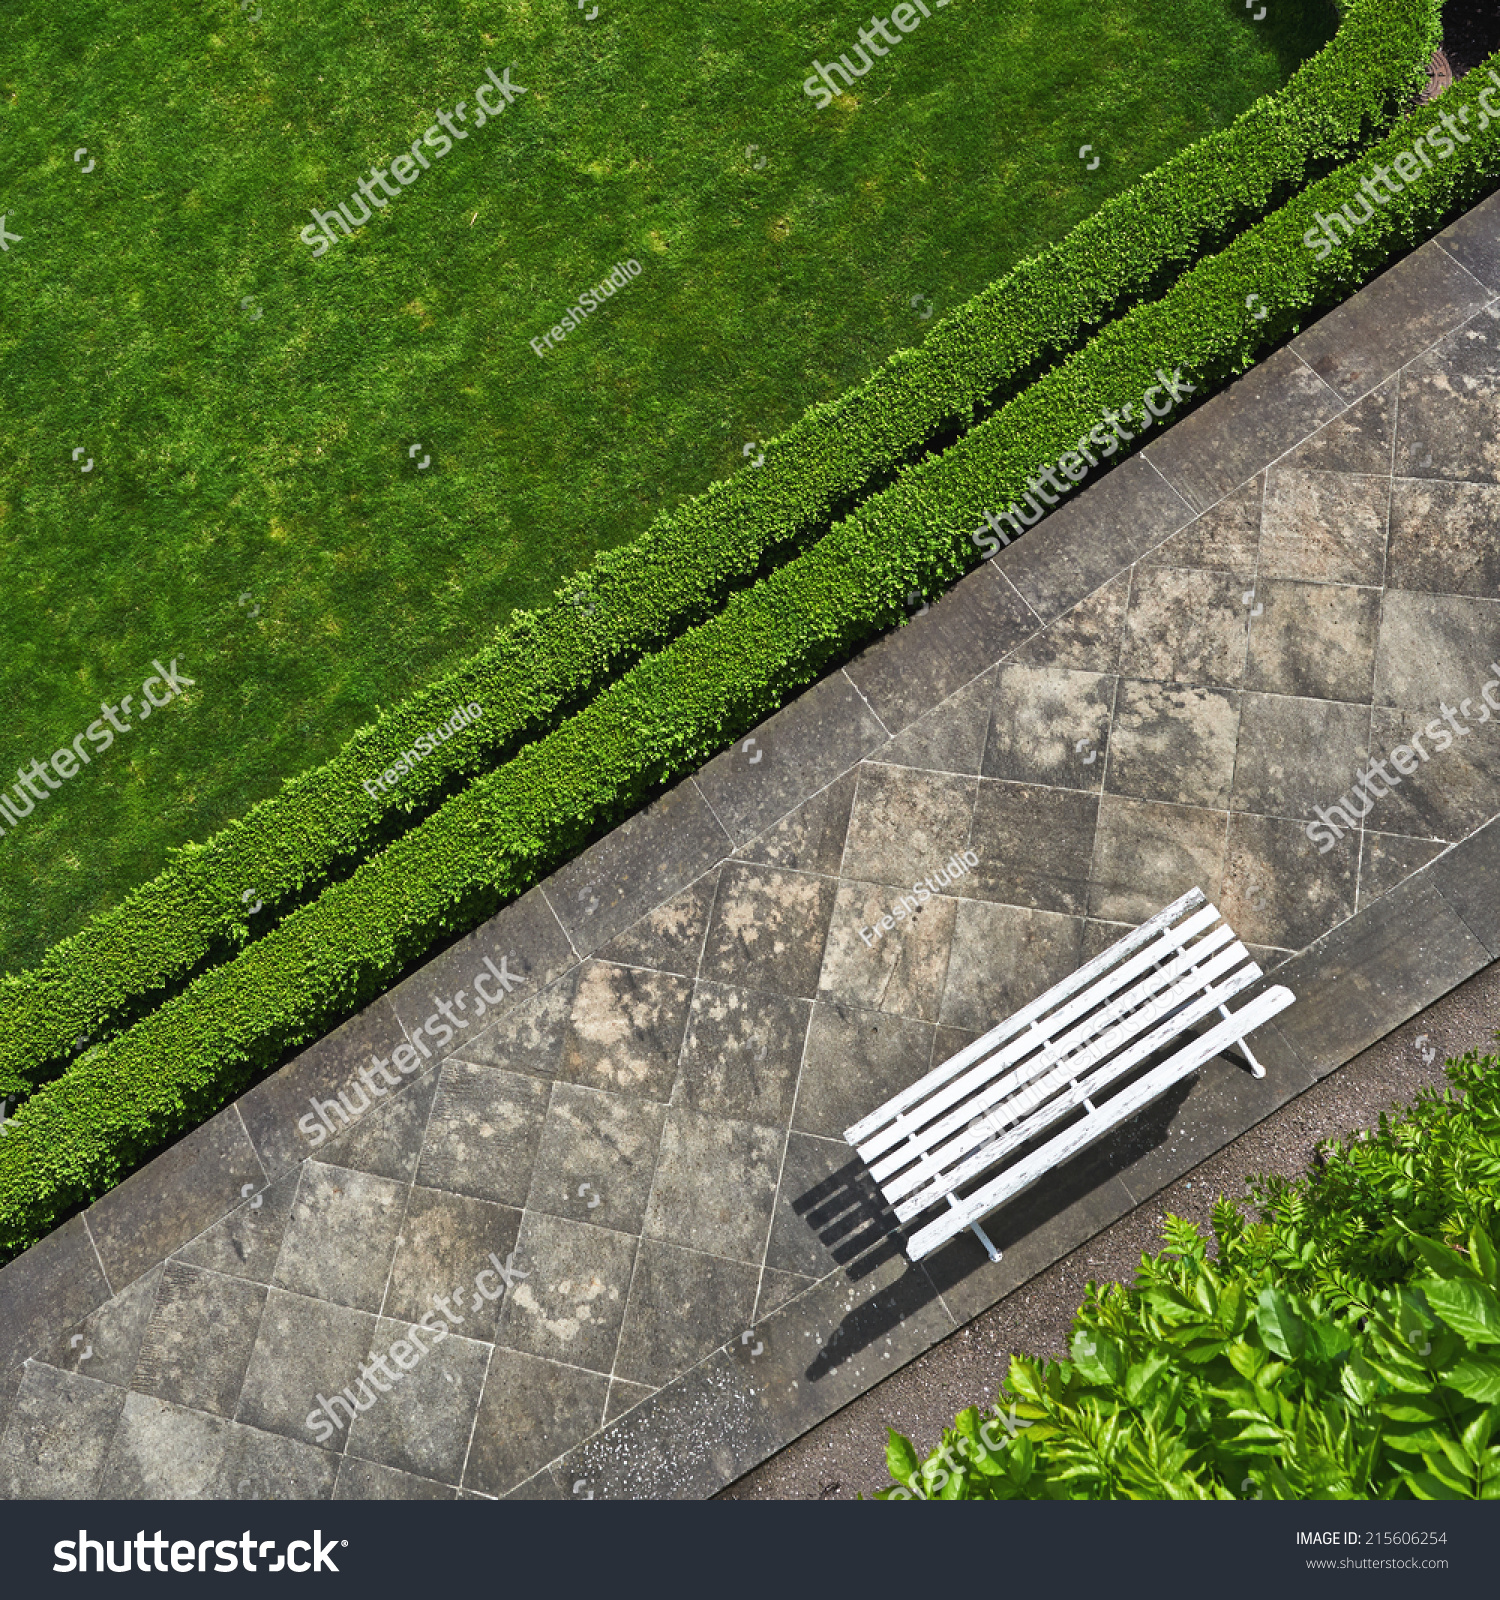 Geometric background with a white bench in a green park. Top view #215606254